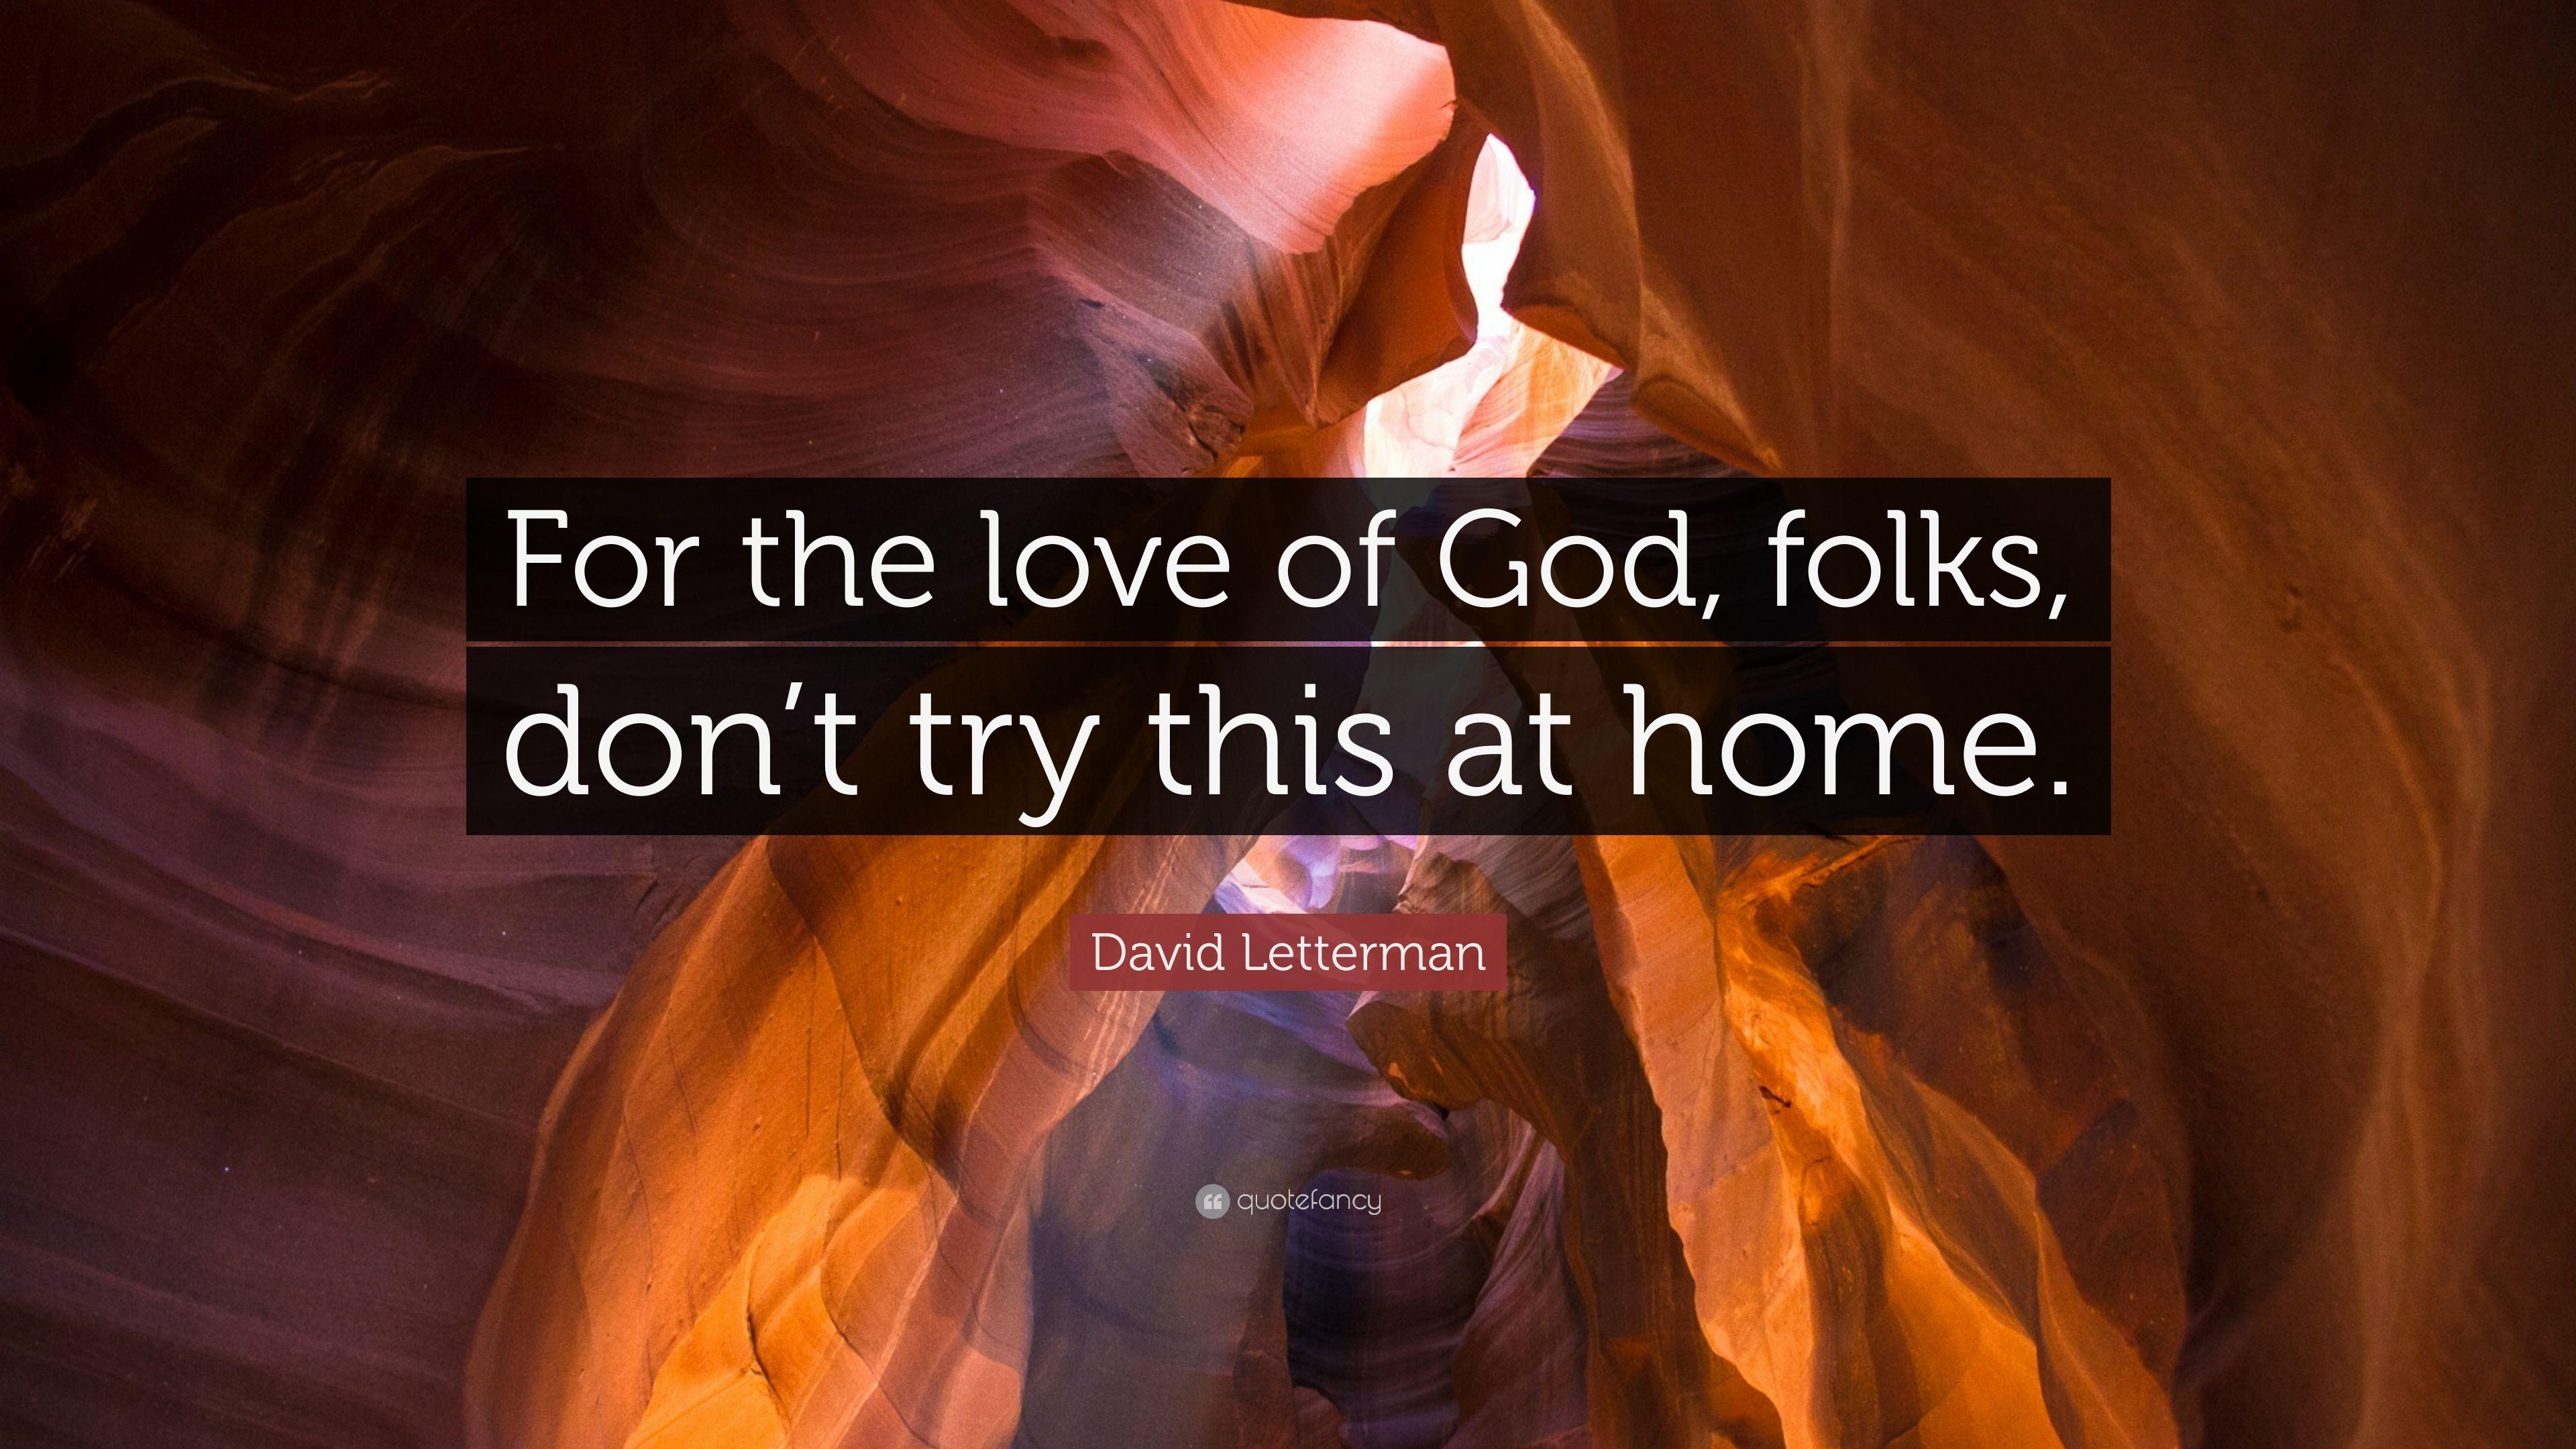 David Letterman Quote: “For the love of God, folks, don't try this